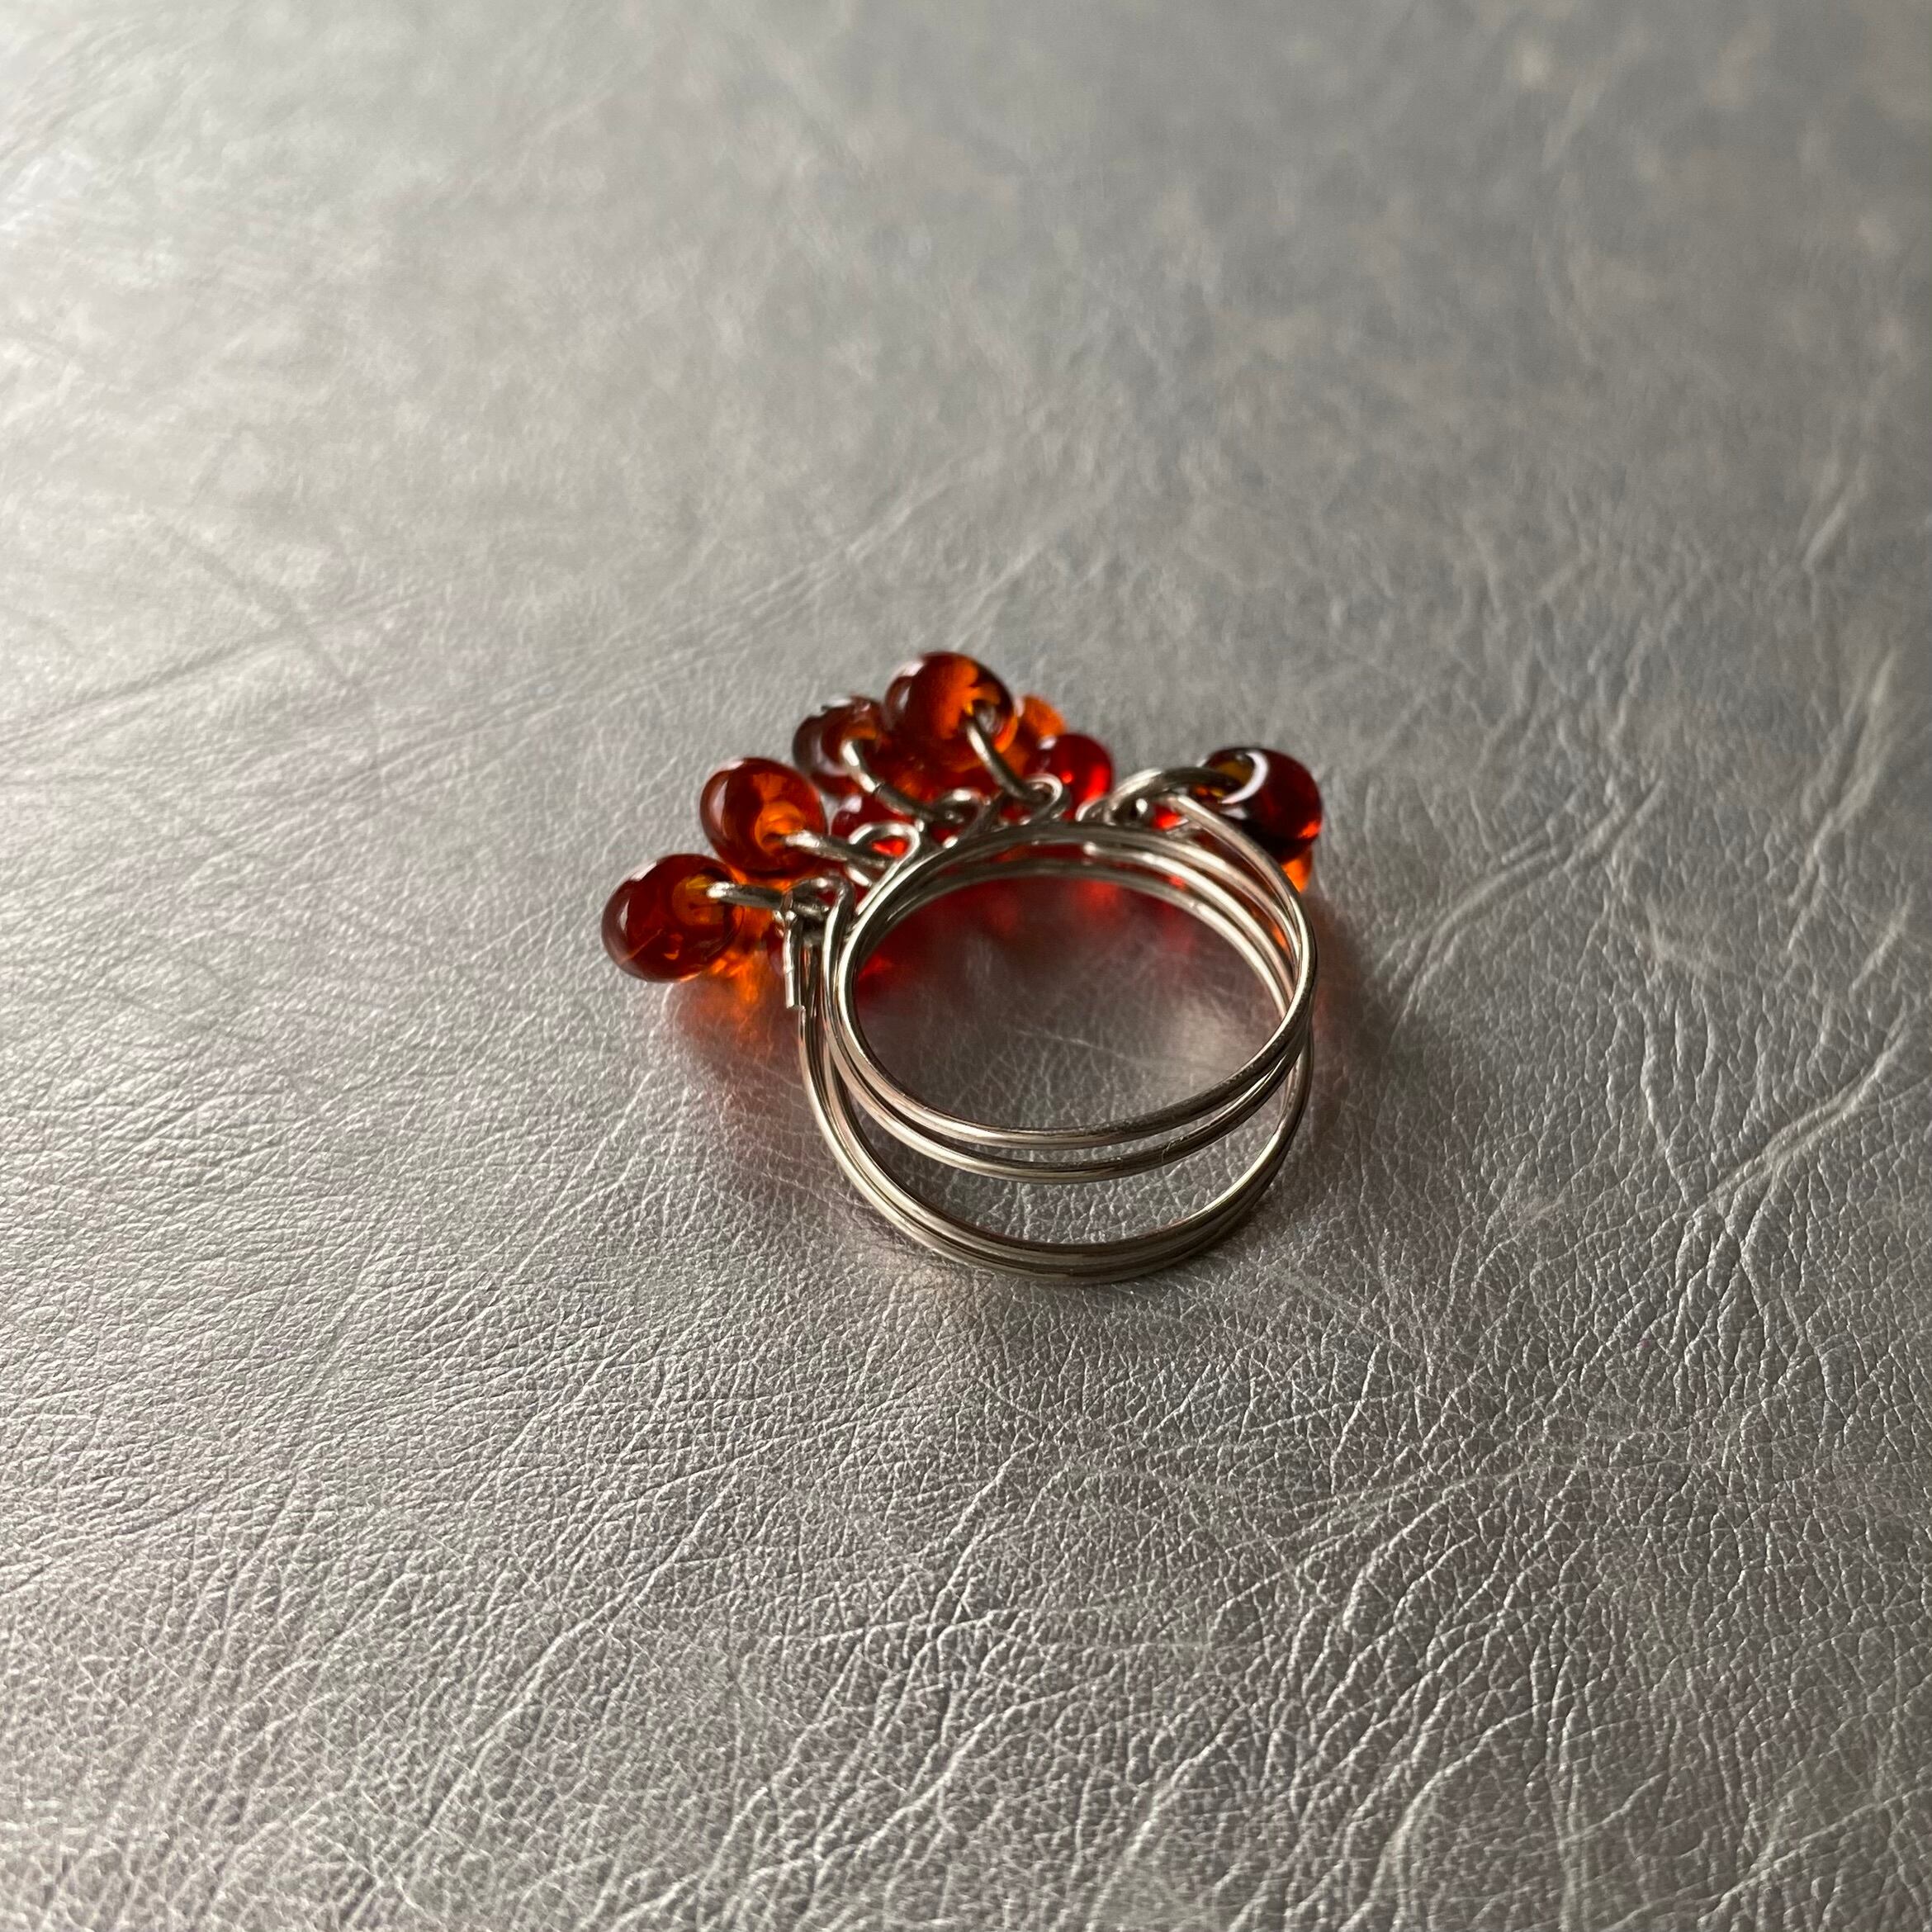 Vintage retro red glass beads ring レトロ ヴィンテージ